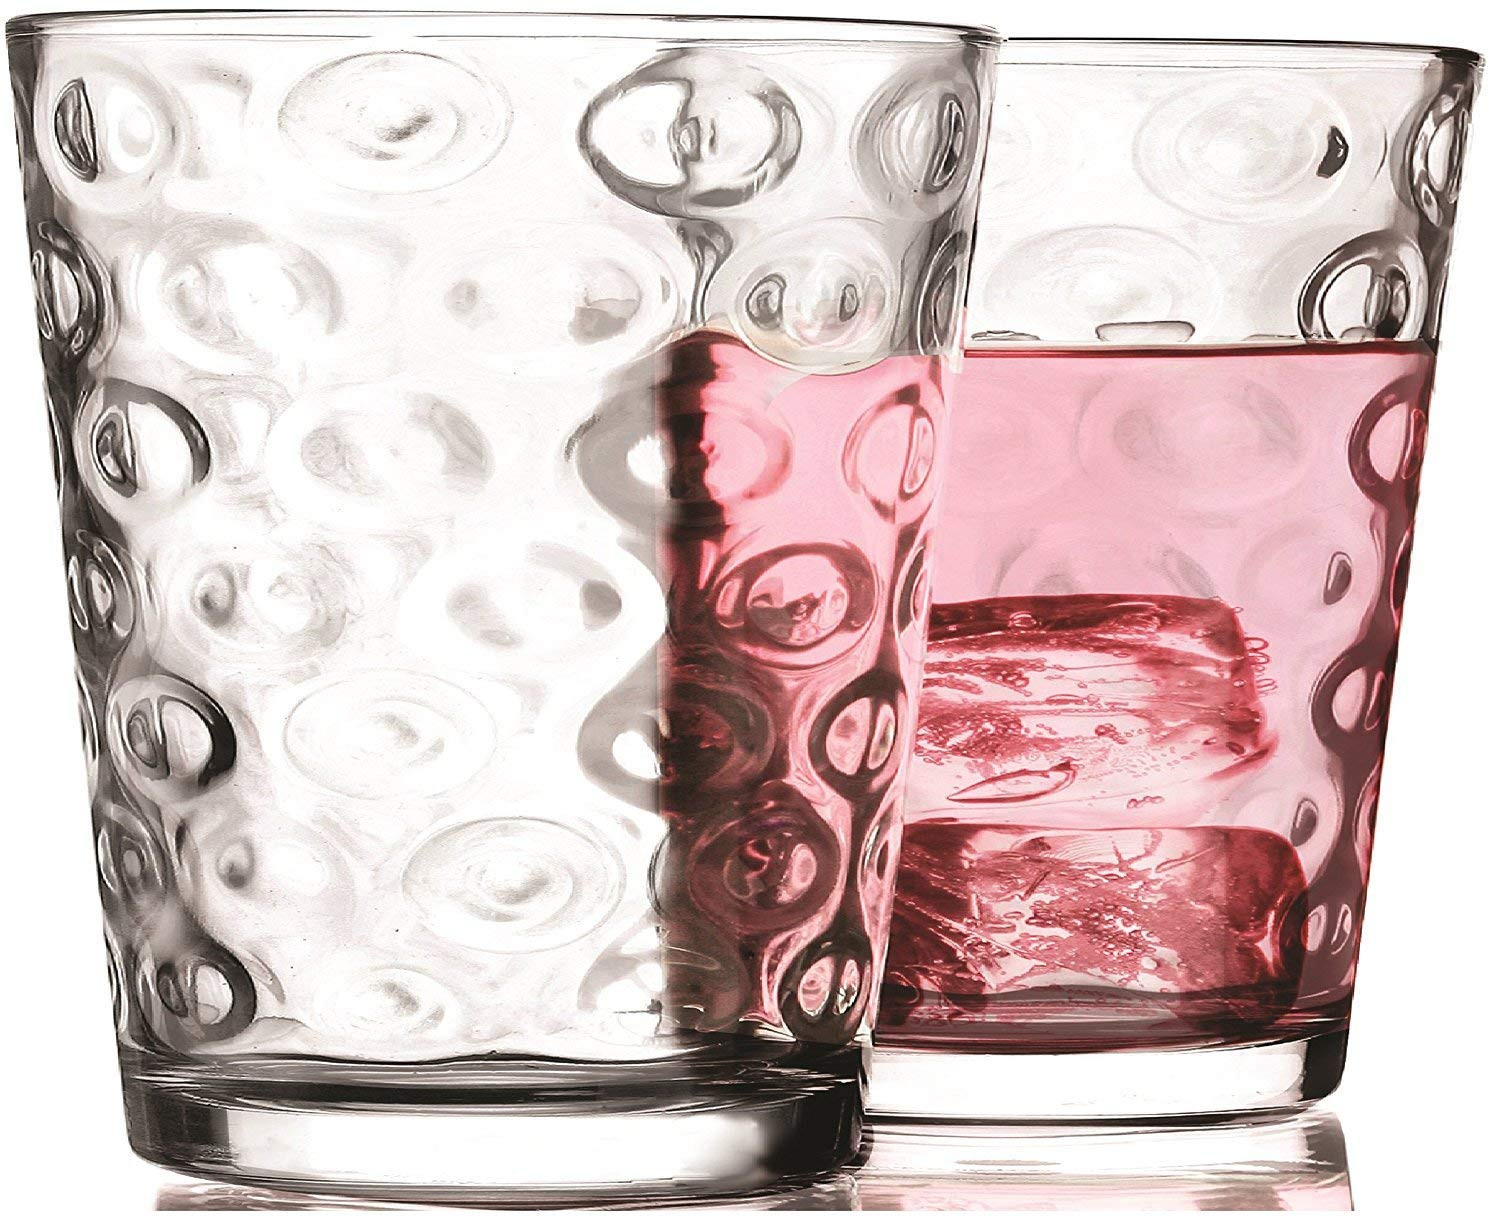 Tall Pilsner Glass Vases Of Amazon Com Circleware 44516 Circles Drinking Glassware Products Inside Amazon Com Circleware 44516 Circles Drinking Glassware Products Clear Mixed Drinkware Sets